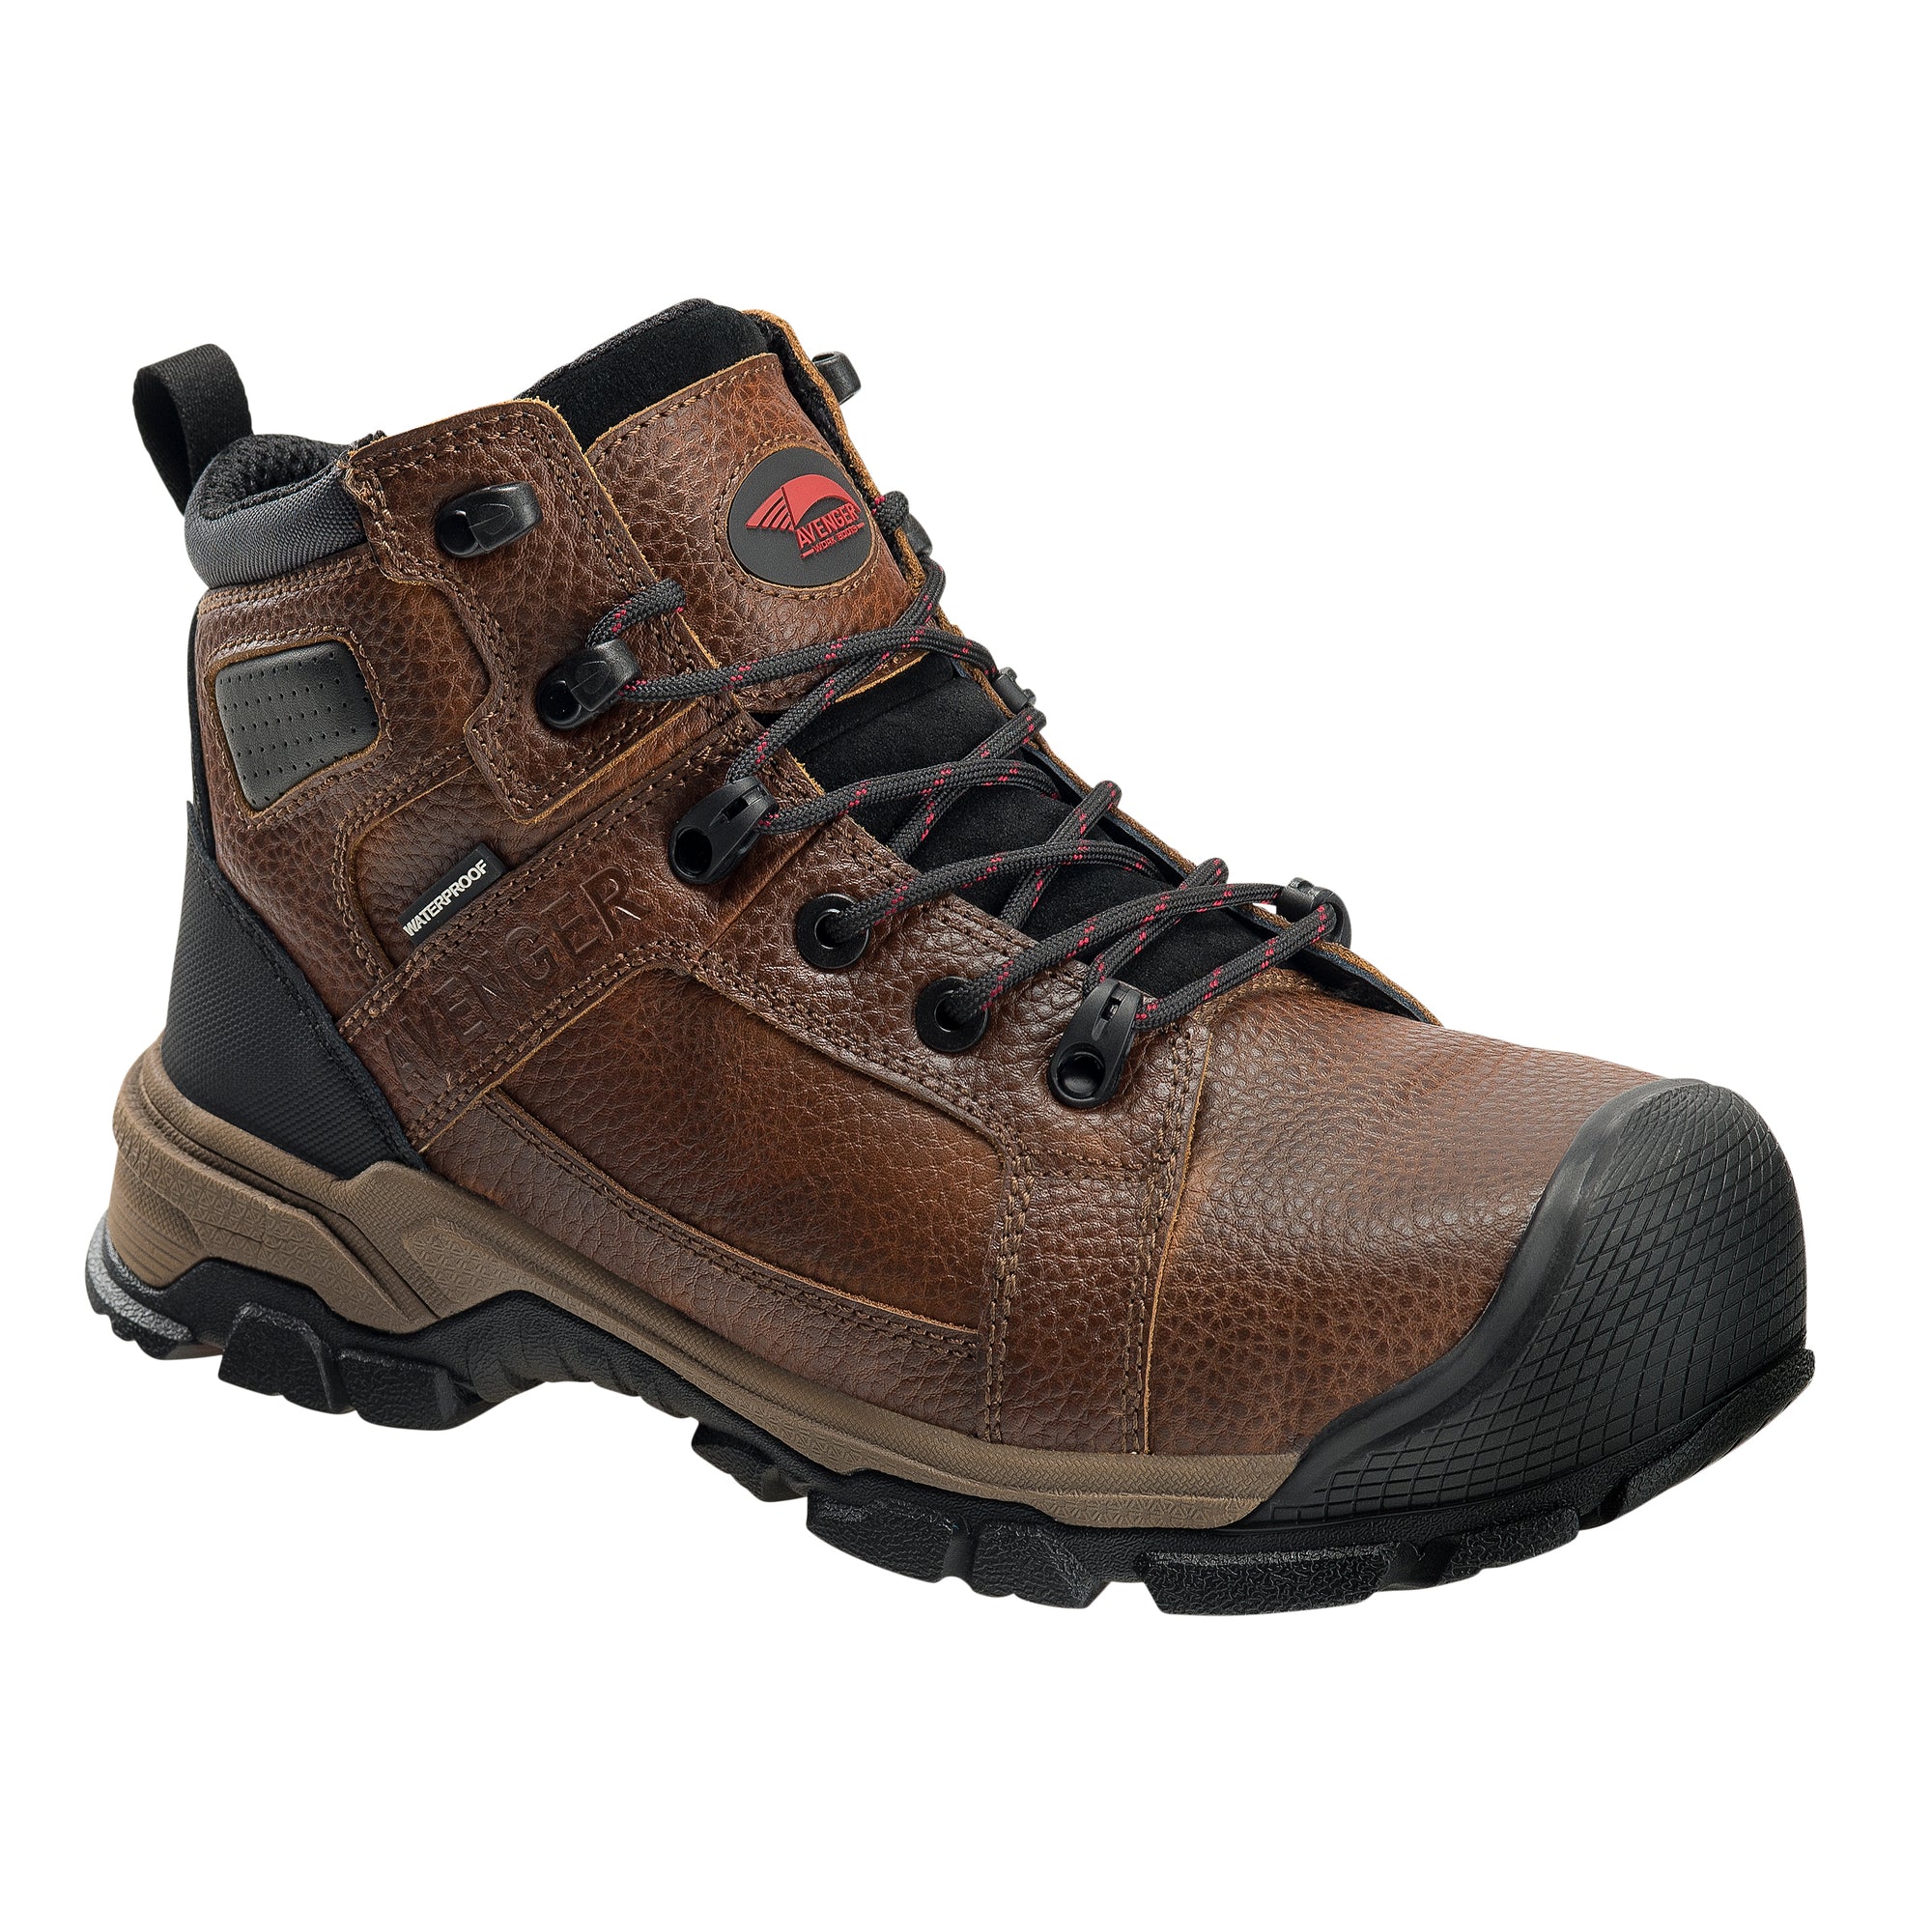 Ripsaw Brown Carbon Toe EH PR WP 6